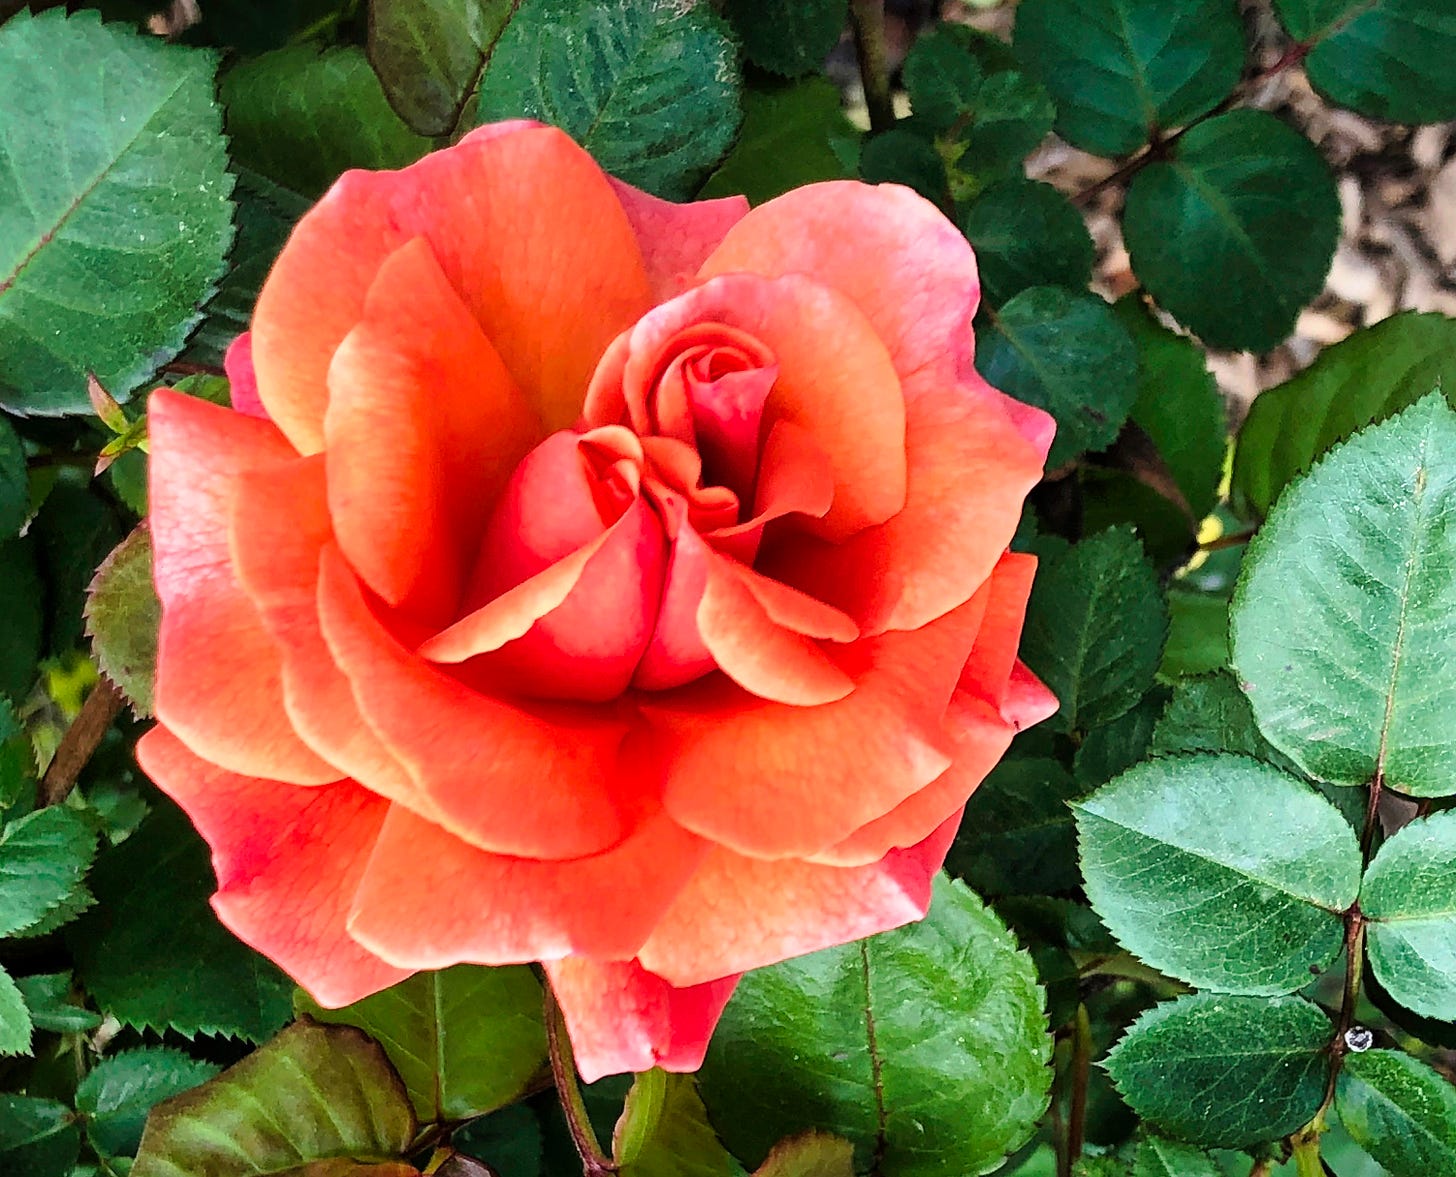 A single dark coral rose against green leaves with sunlight shining from the left of the image